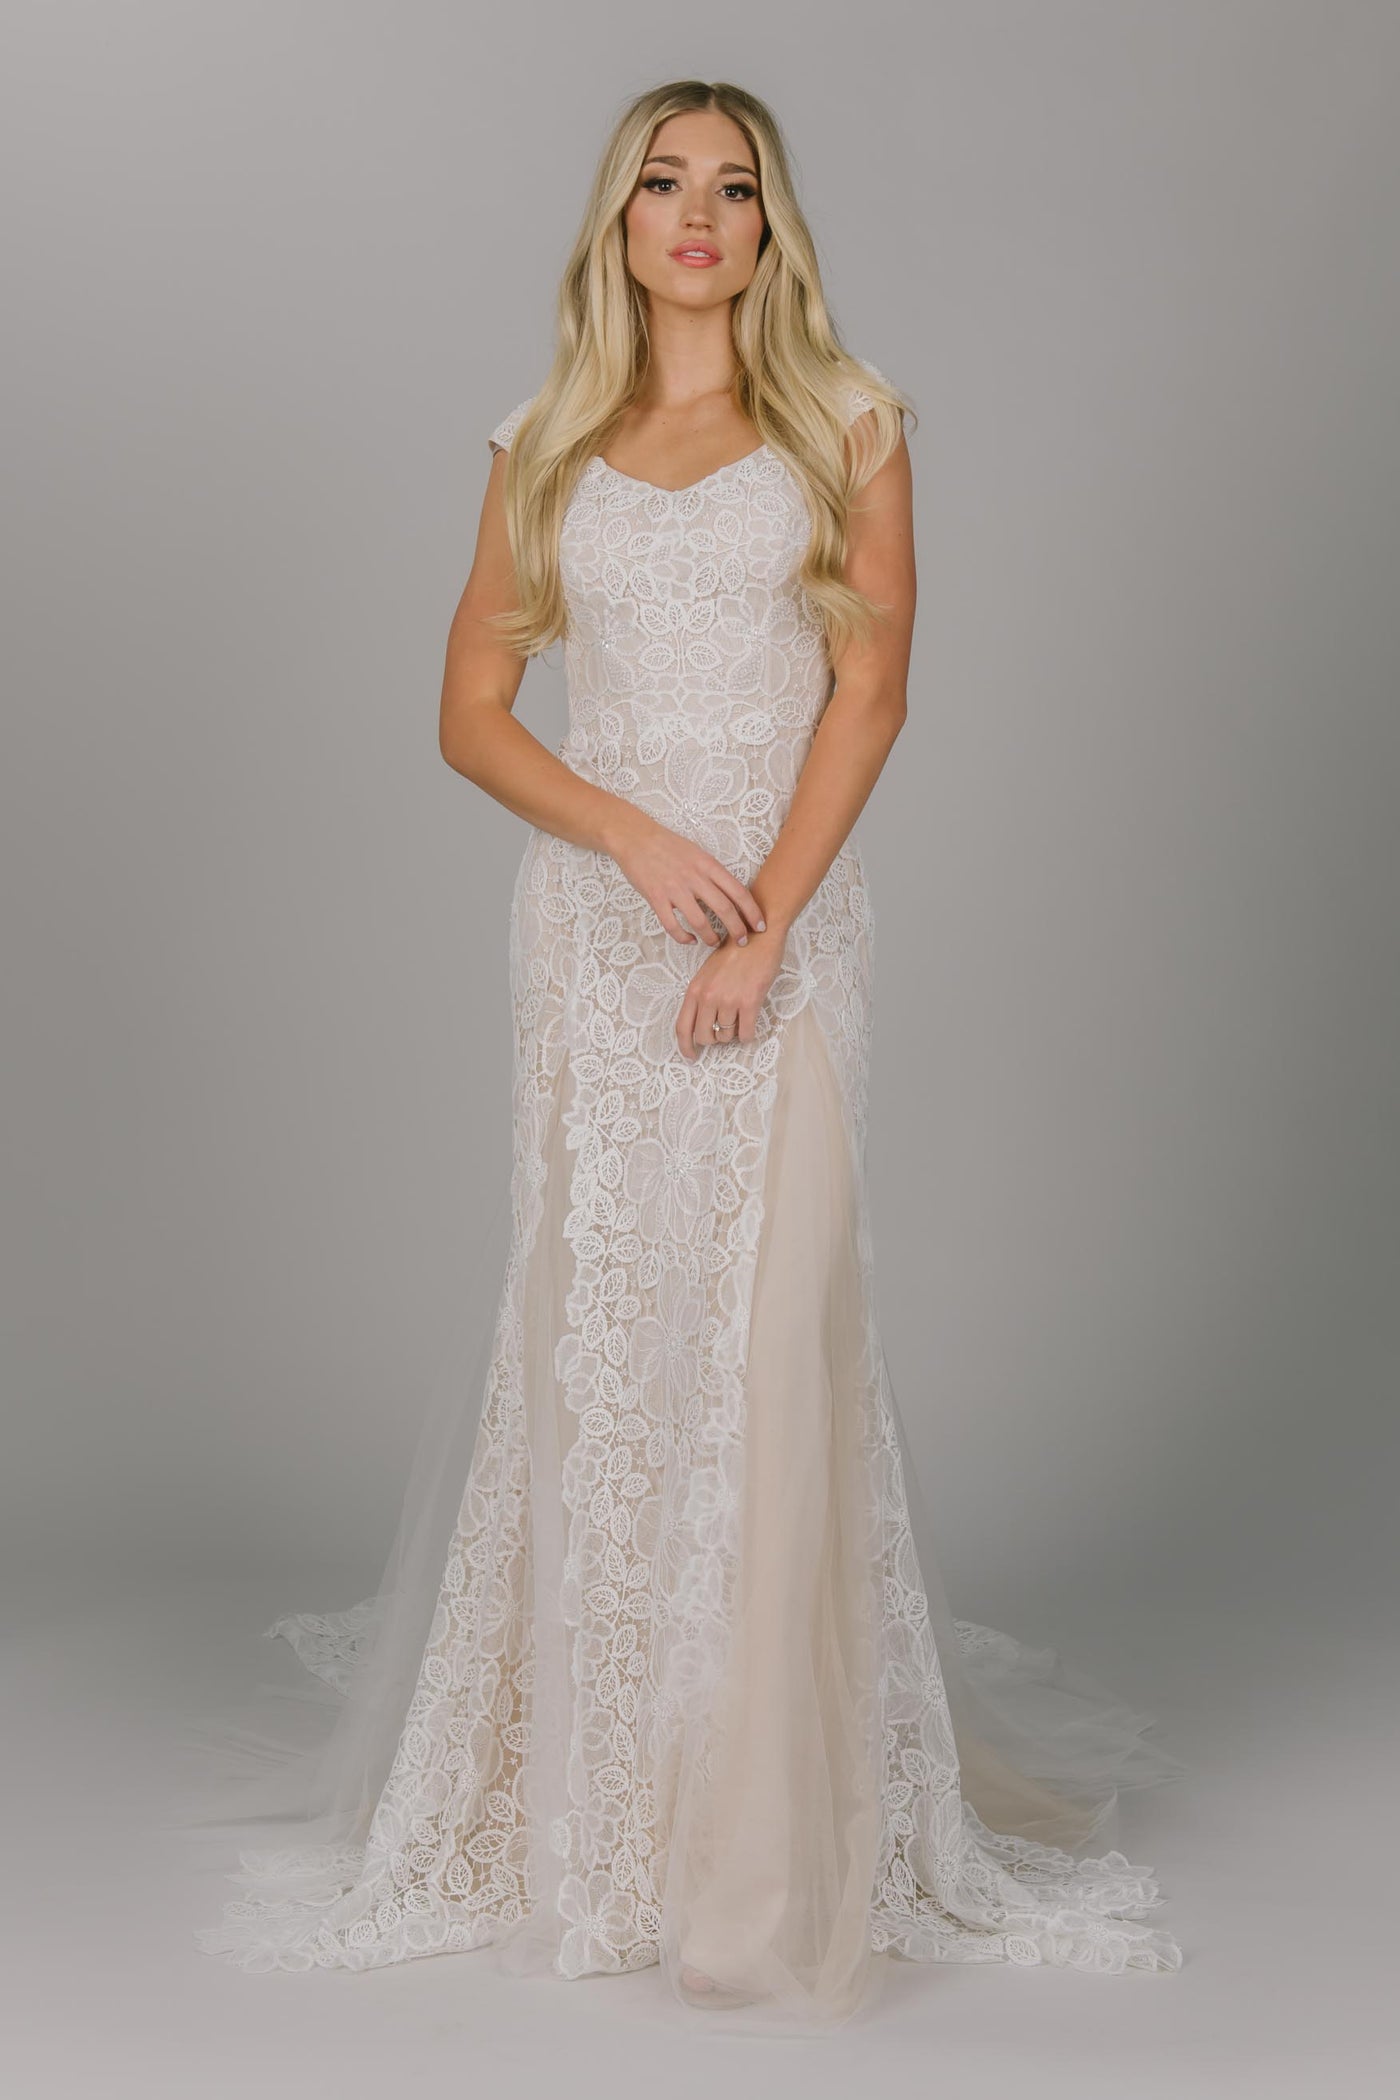 Fitted modest wedding dress featuring flower petal lace. It has a v-neckline and champagne underlay. It has cap sleeves and tulle slits. Absolutely stunning for any modest wedding dress bride.  